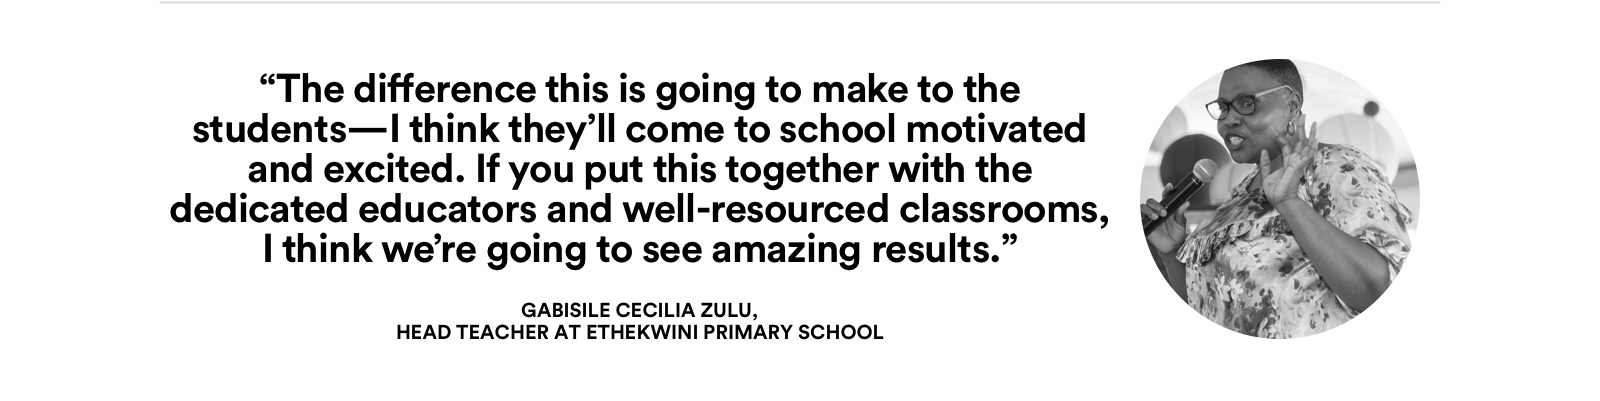 Quote from Head teacher at Ethekwini Primary School.